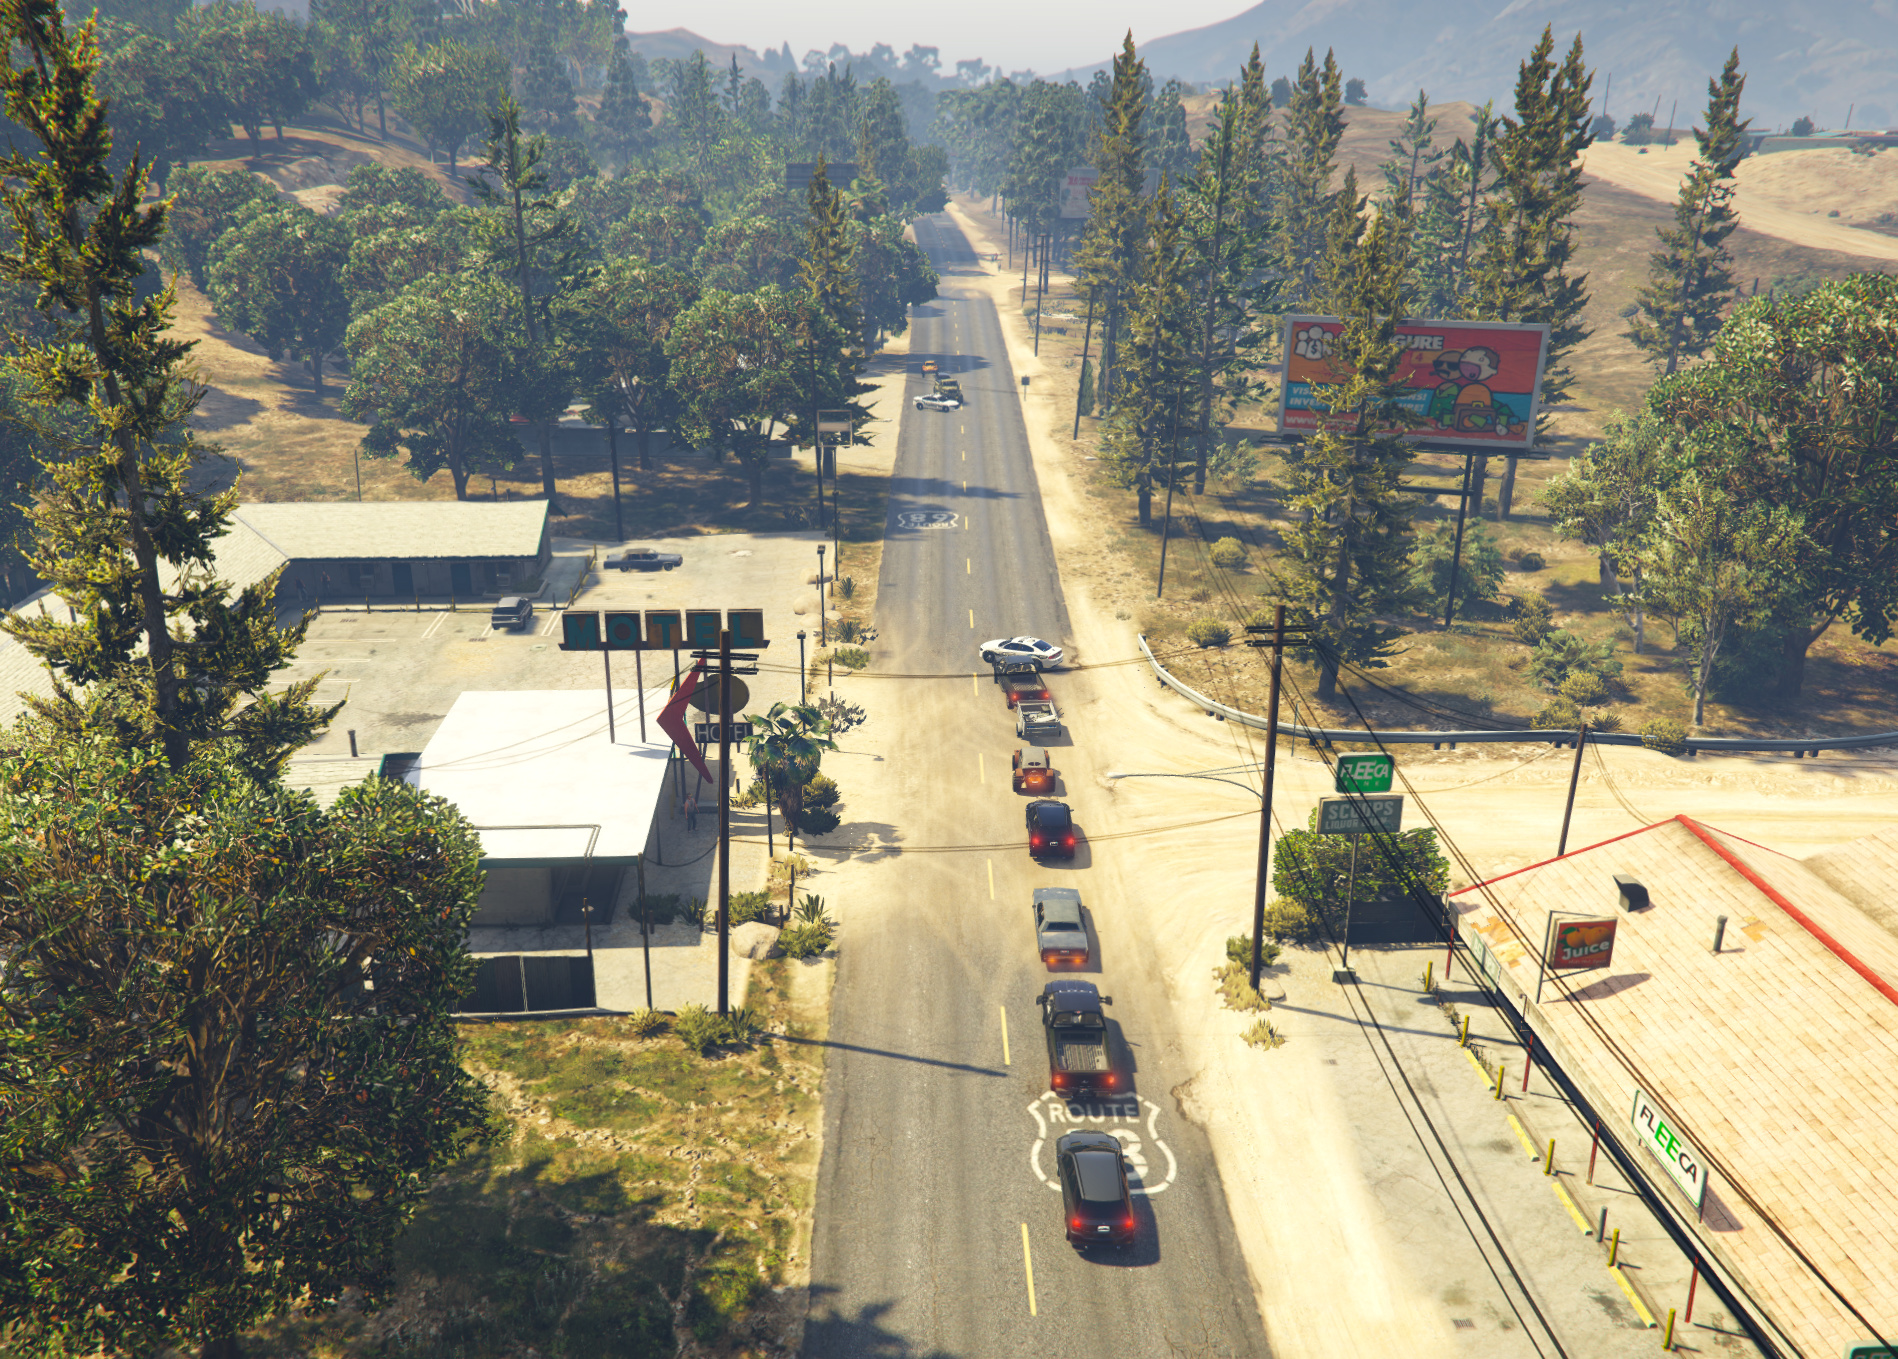 Join 2REAL - GTA V with Realistic Traffic Server #assettocorsa